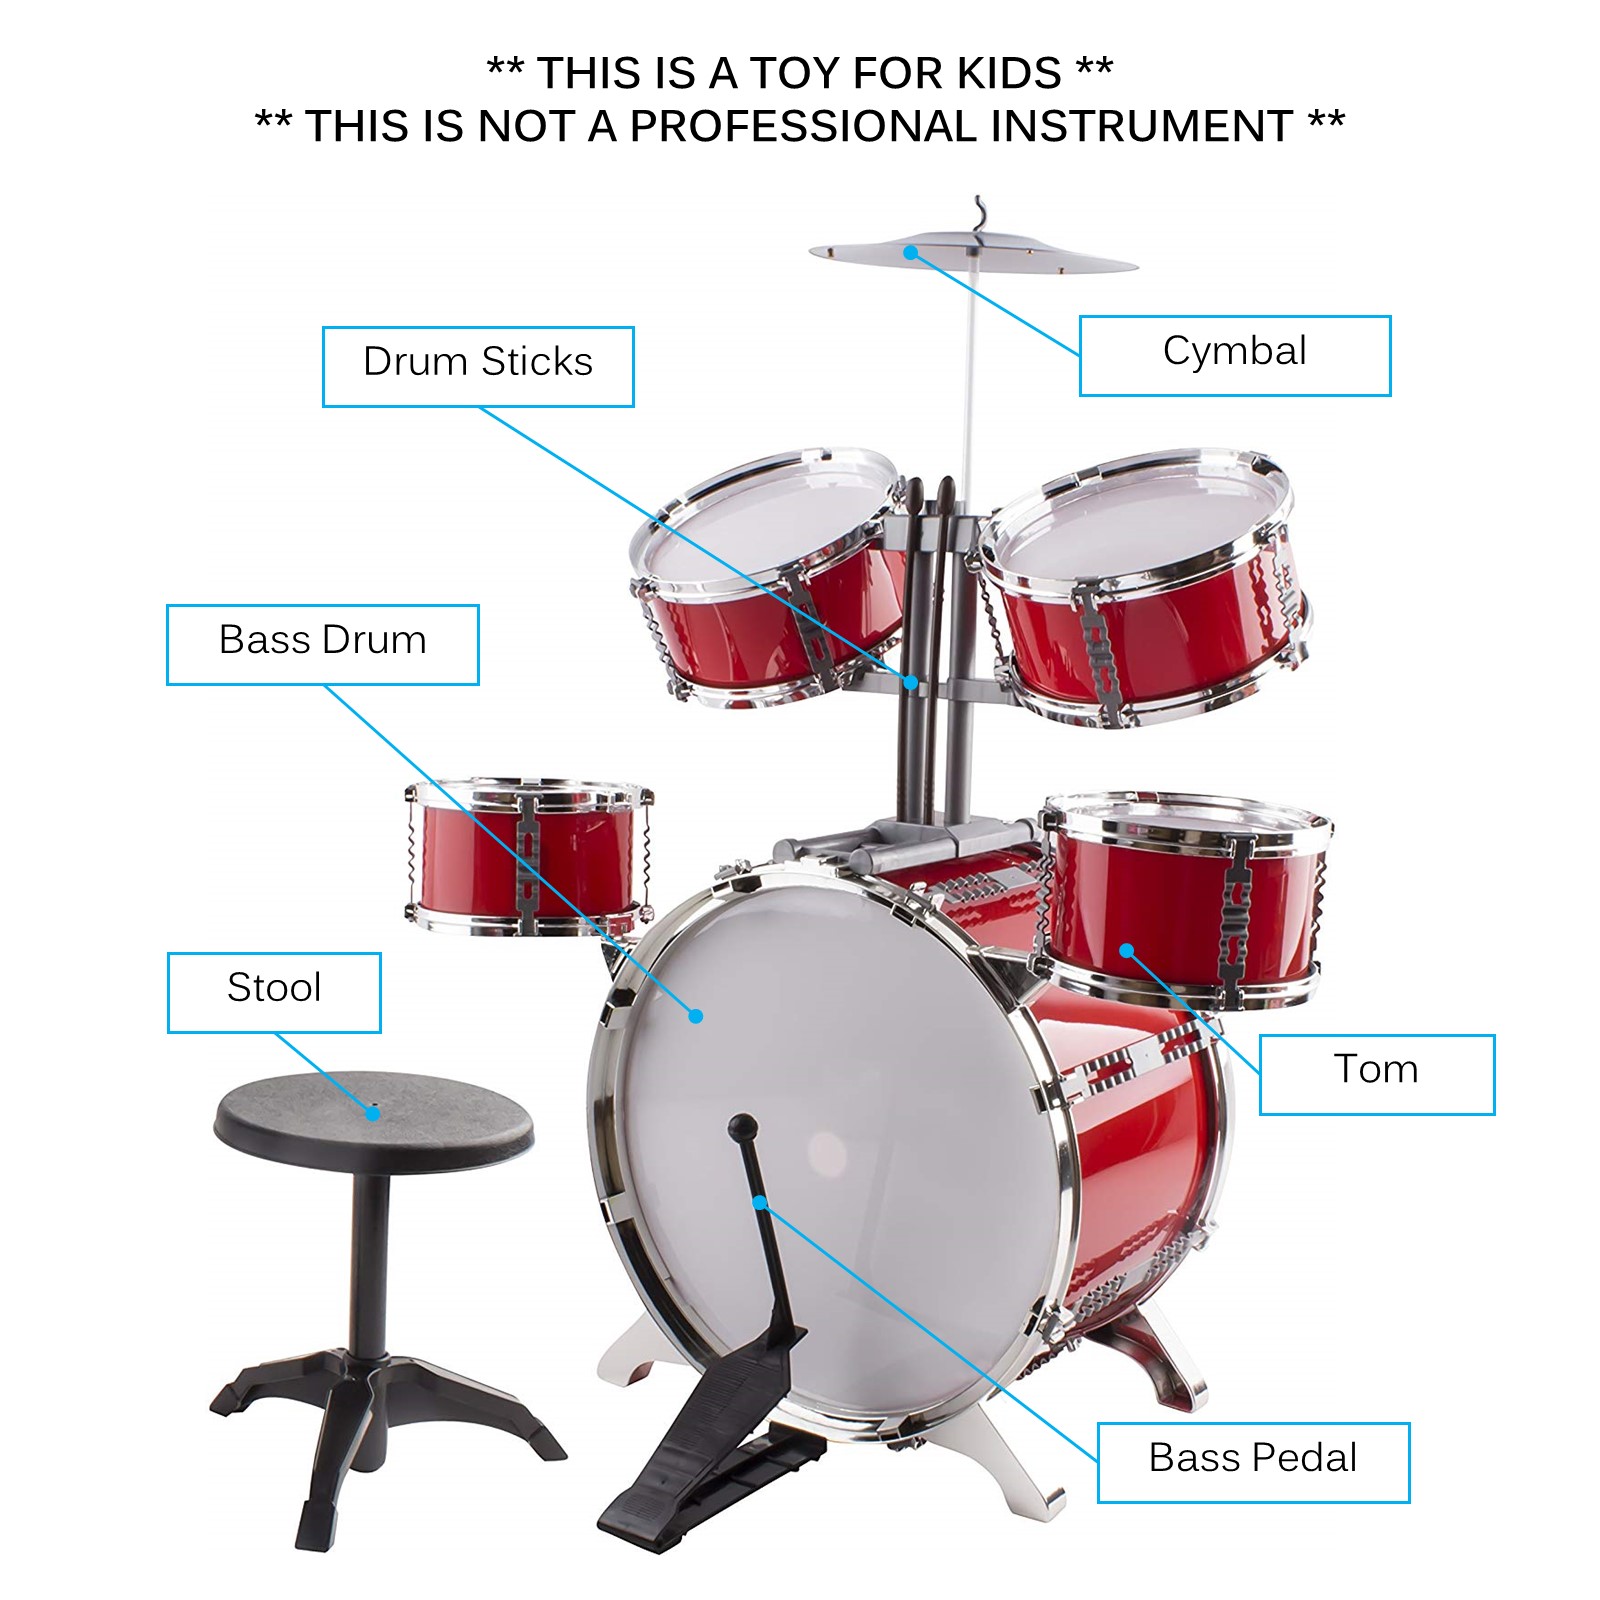 Classic Rhythm Toy Jazz Drum Big XXXL Size Children Kid's Musical Instrument Playset With 5 Drums, Cymbal, Chair, Kick Pedal, And Drumsticks A Perfect Beginner Set For Kids (Blue) 661-900